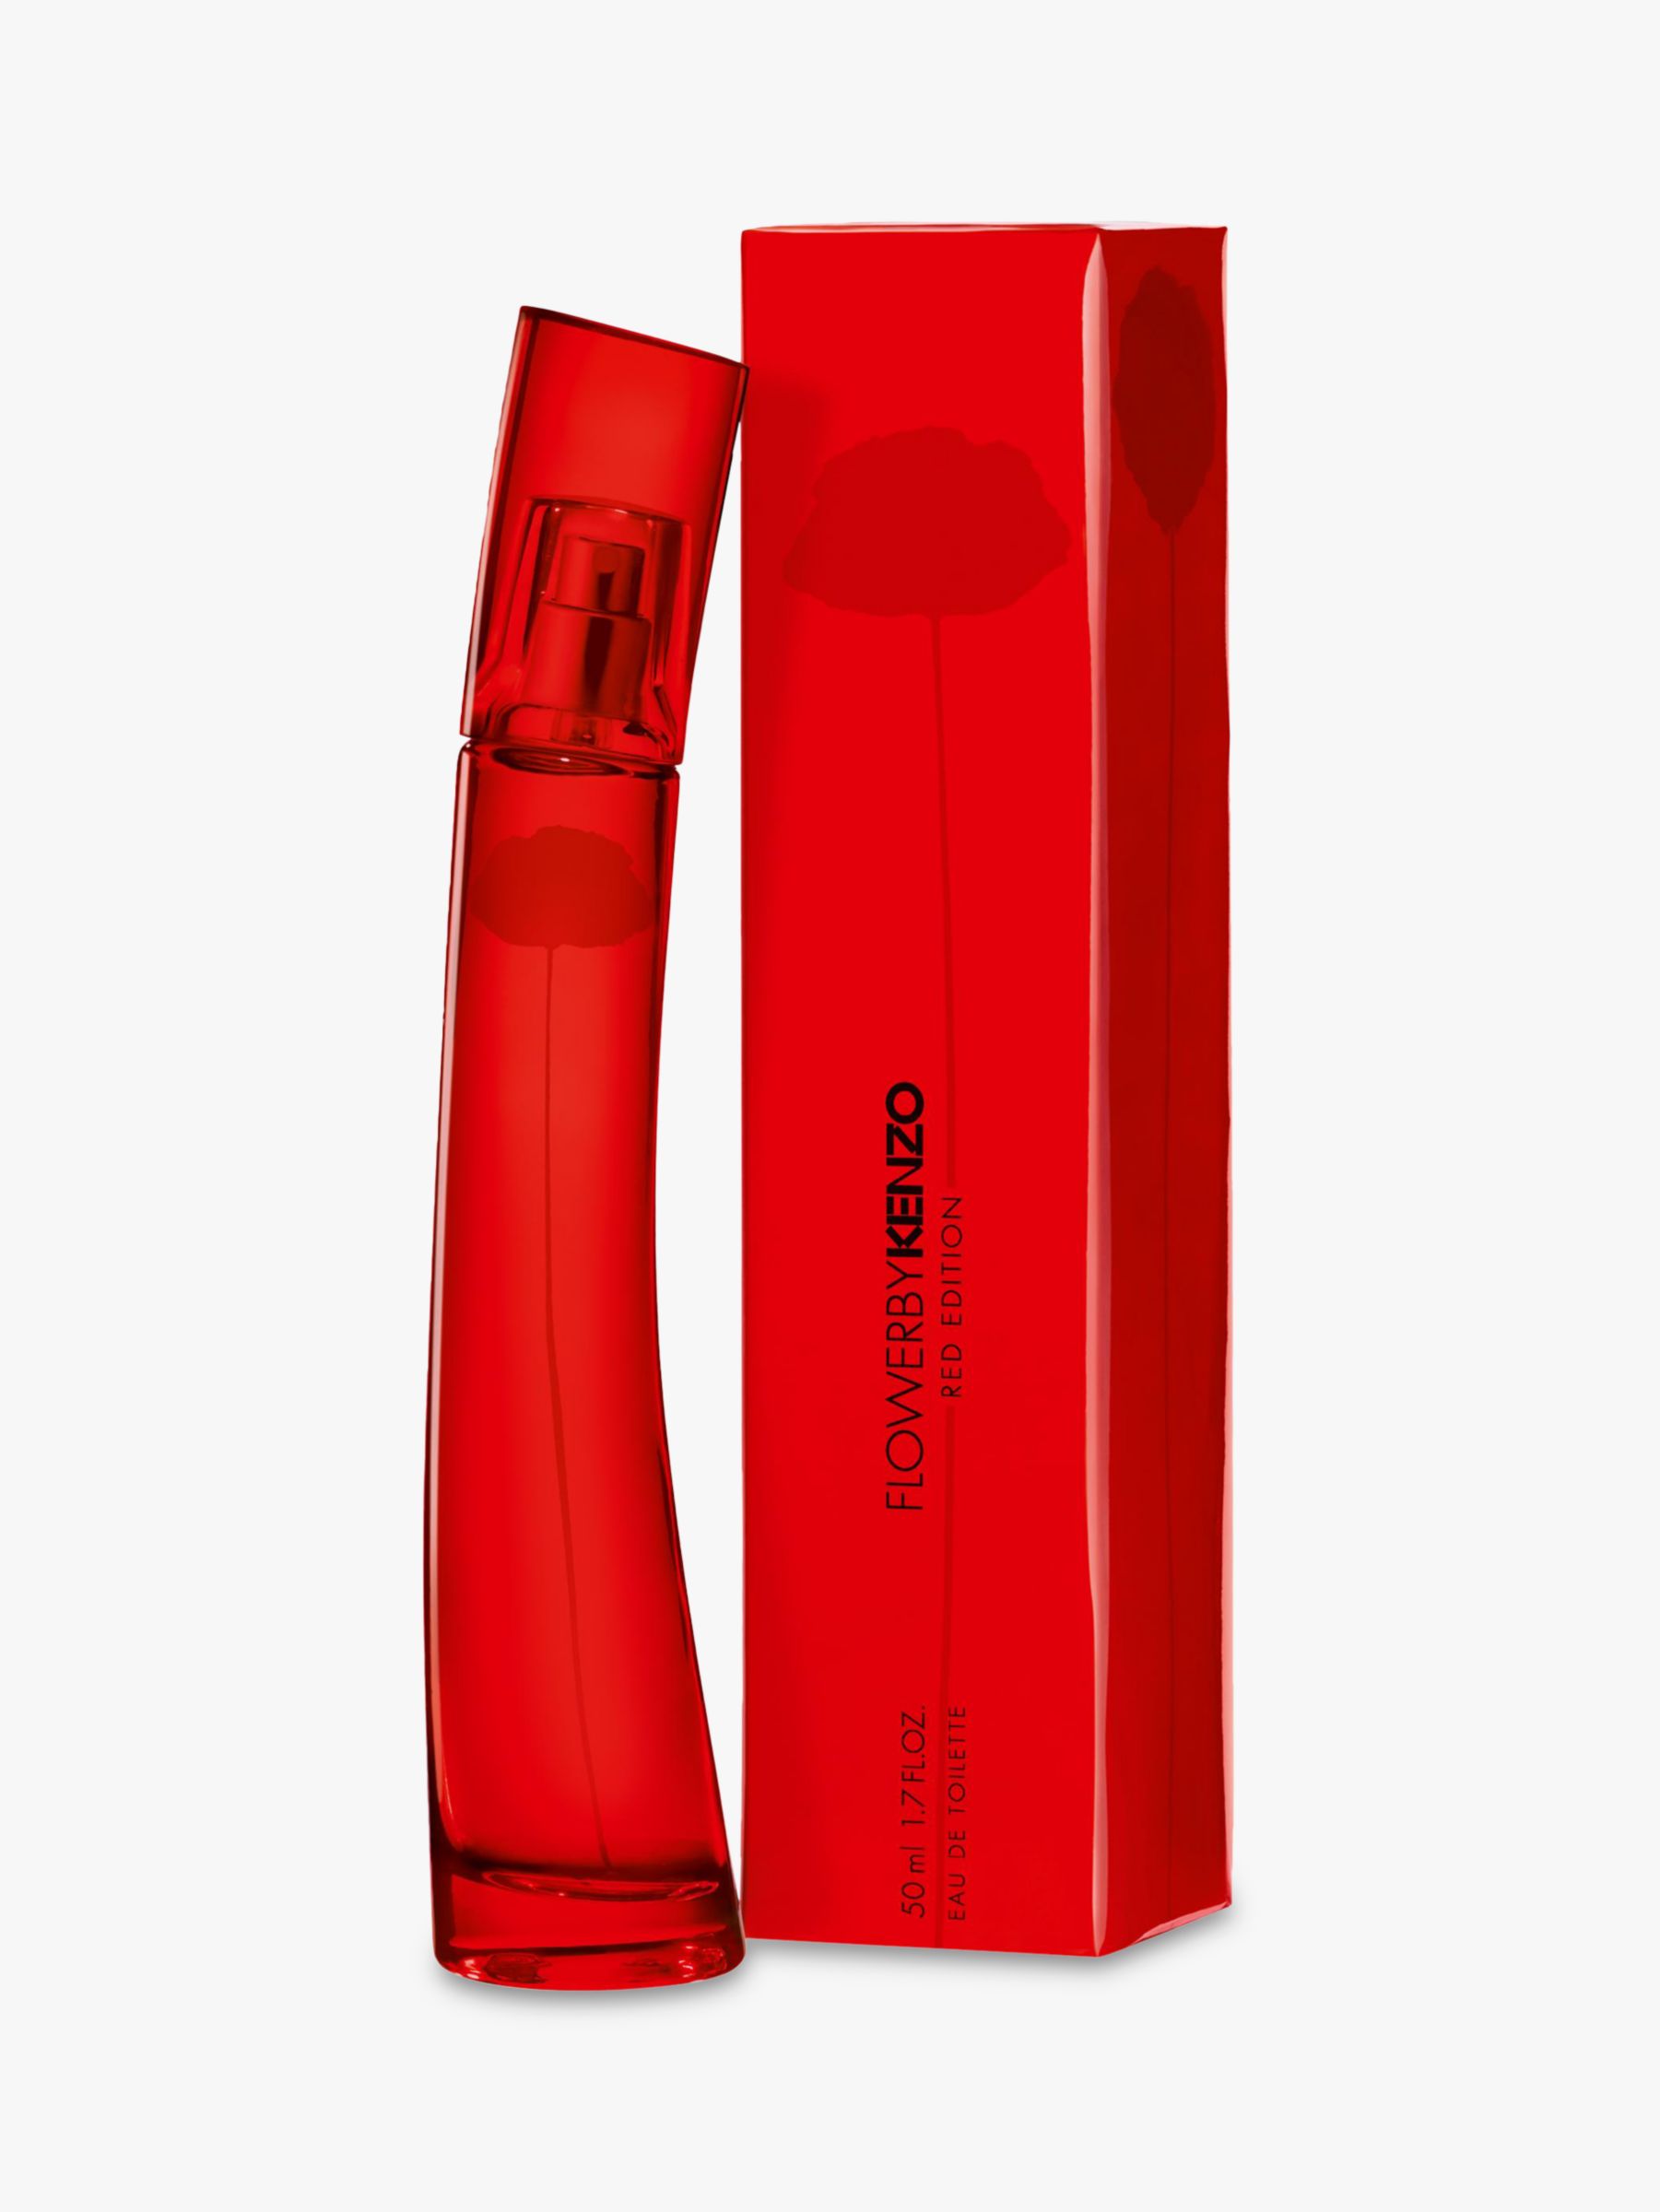 kenzo red edition